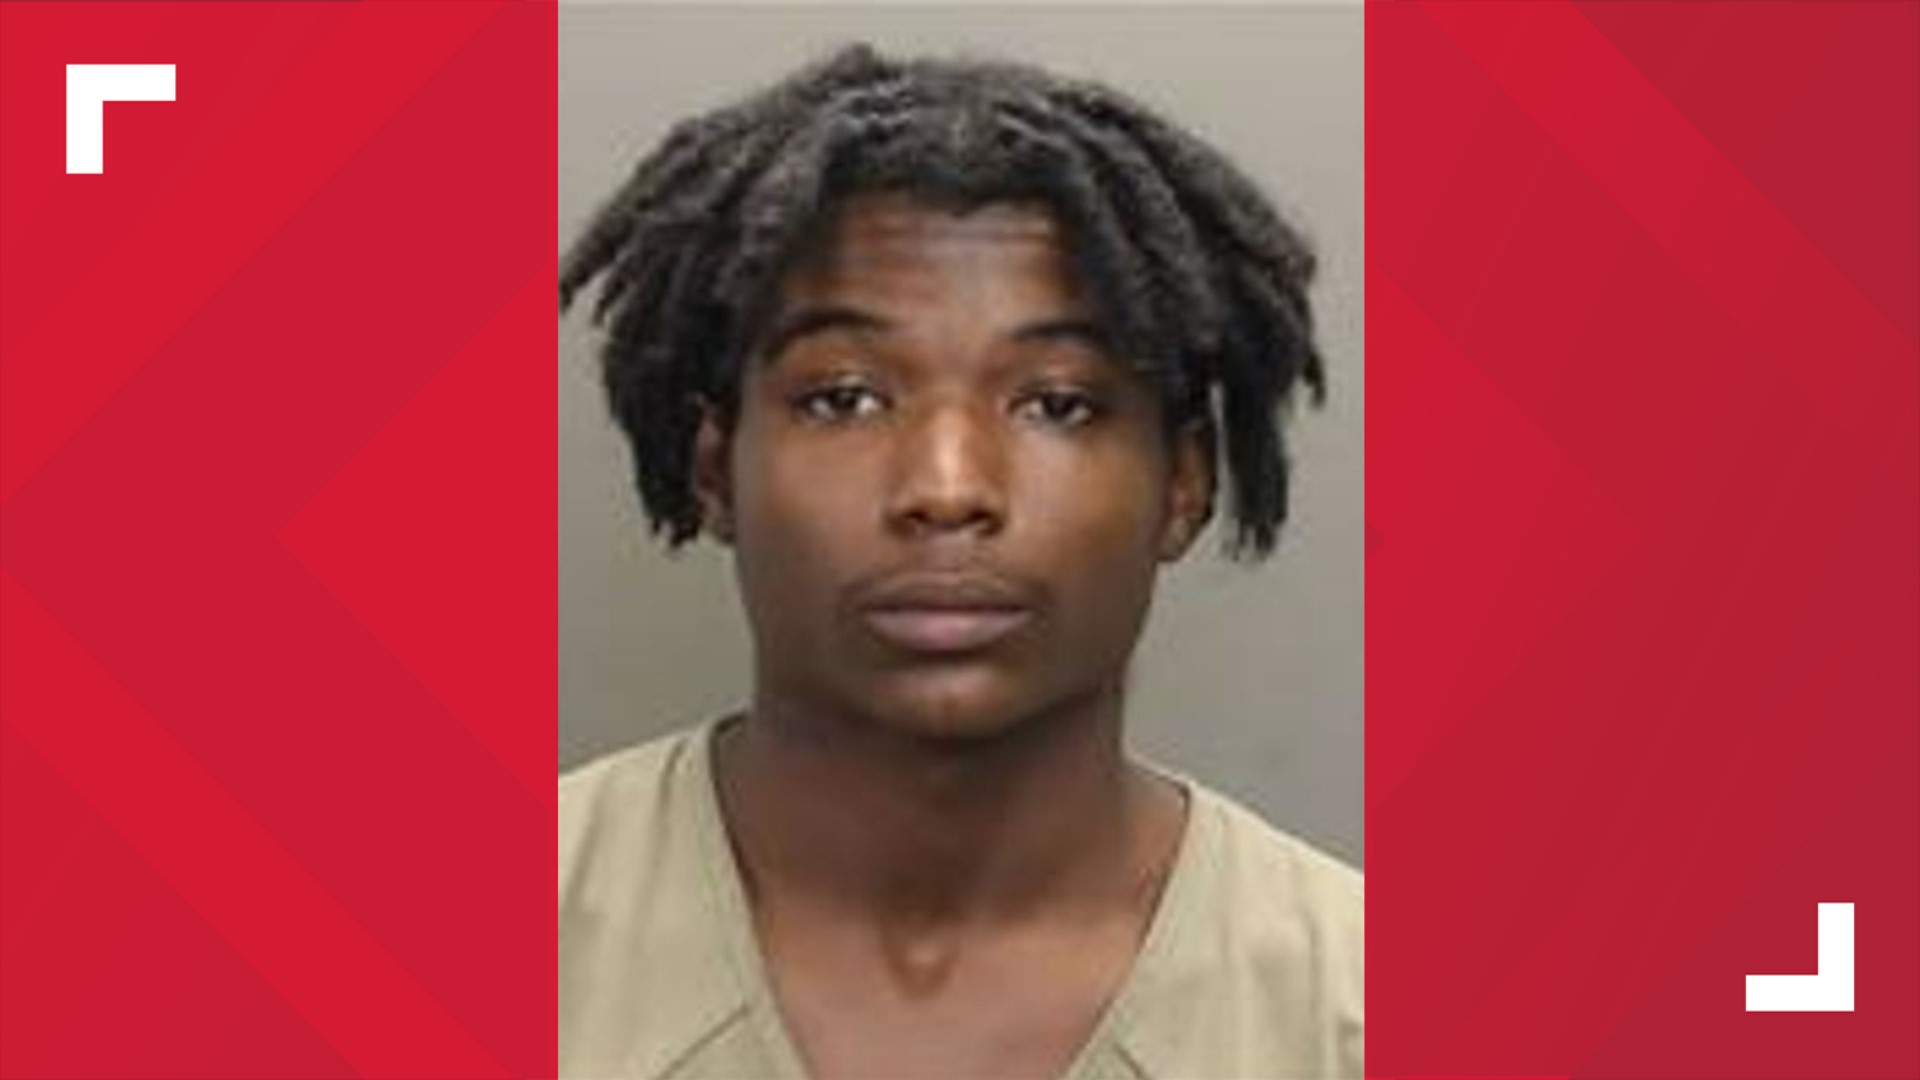 Officers arrested 18-year-old Charles Fleming without incident after a warrant was put out for his arrest on Aug. 7.